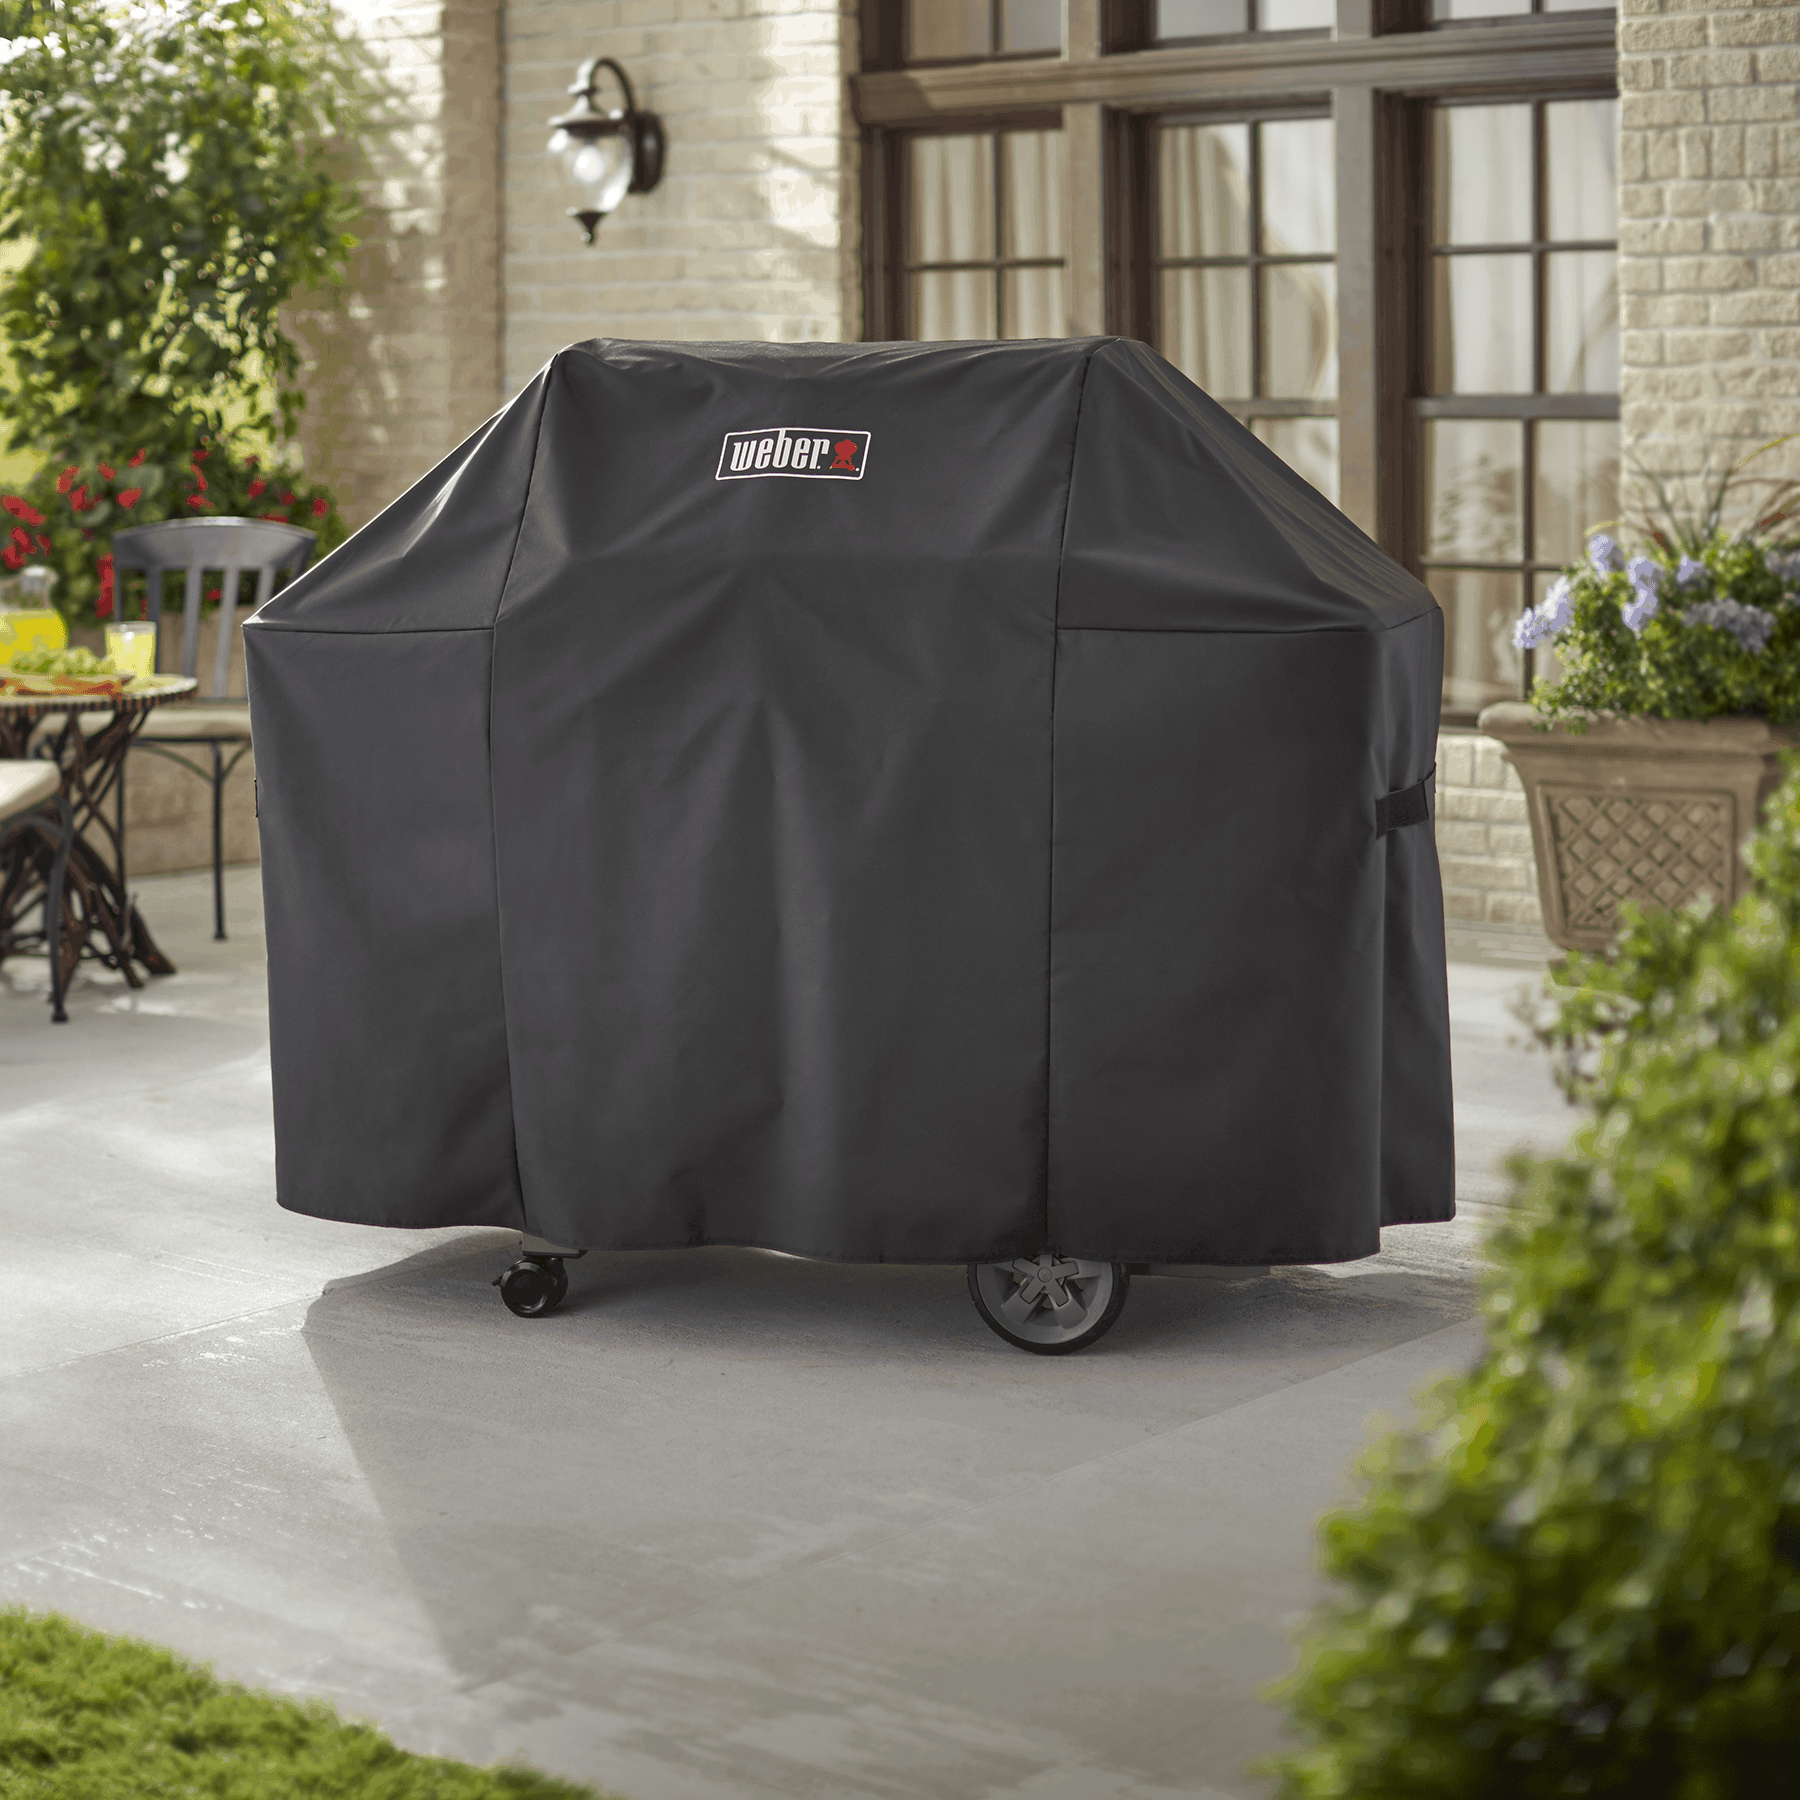 73 Inches BBQ Grill Cover for Weber Genesis 610/Genesis II LX 600 Series and Summit 600 Series Grill QuliMetal 7132 Grill Cover for Weber Genesis II 6 Burner Grill and Weber Summit 6 Burner Grill 